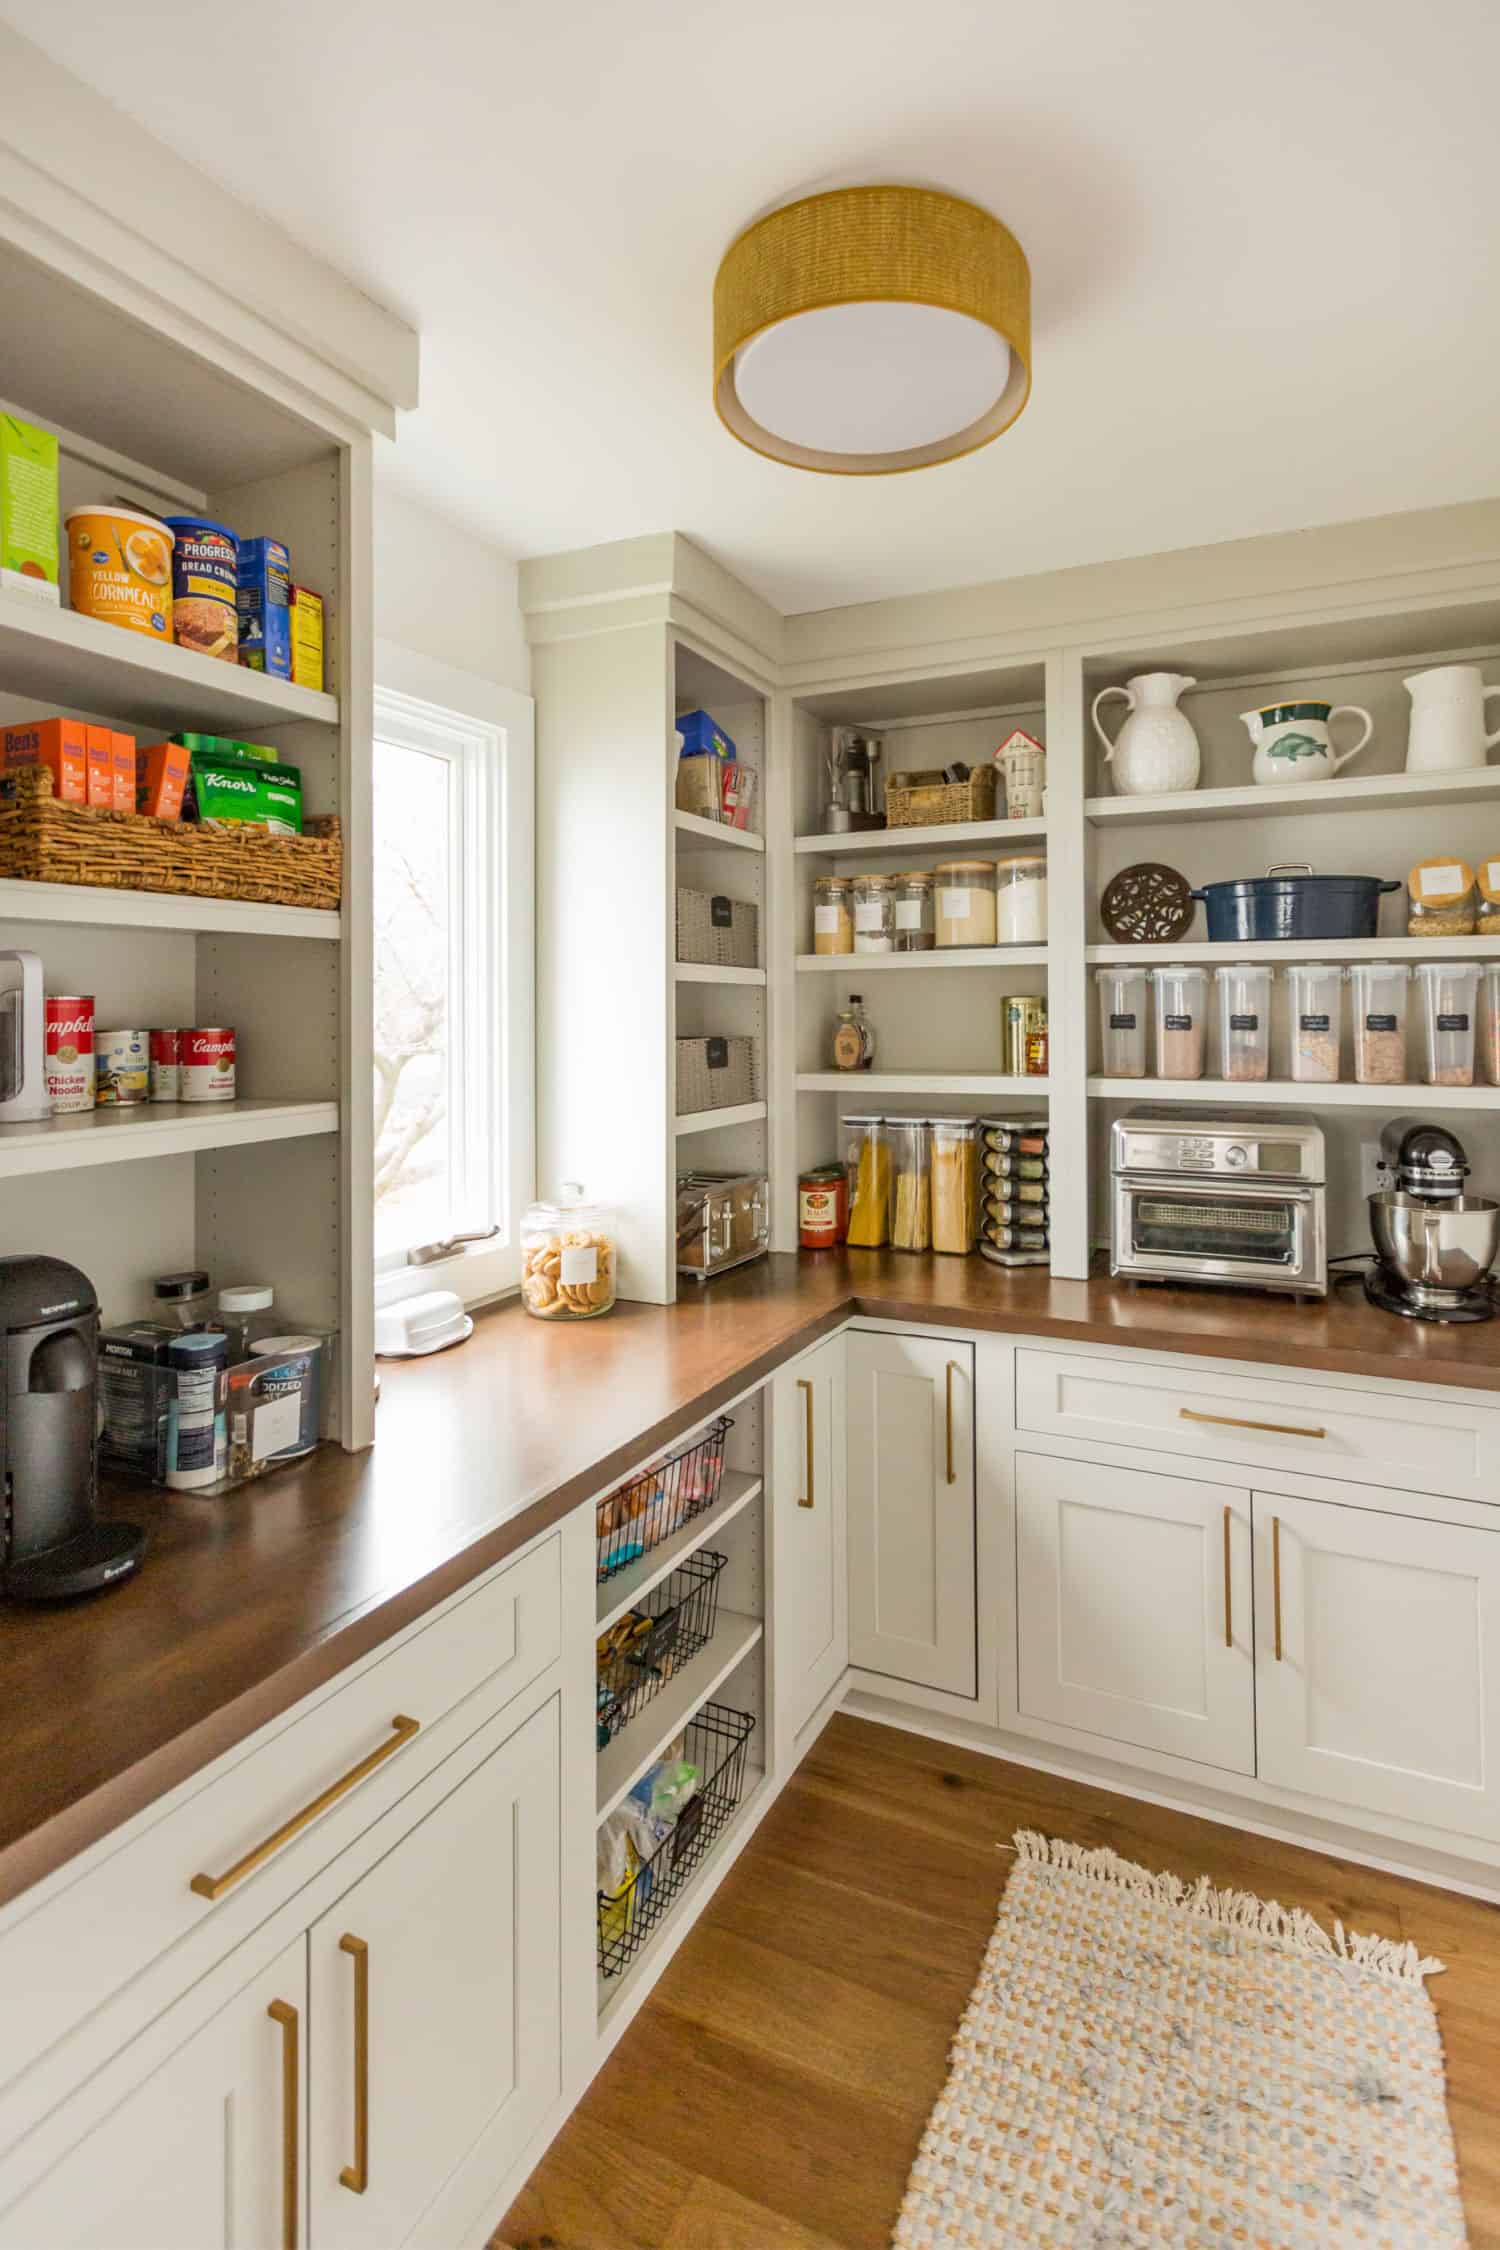 Nicholas Design Build | A remodeled kitchen with lots of shelves and counter space.